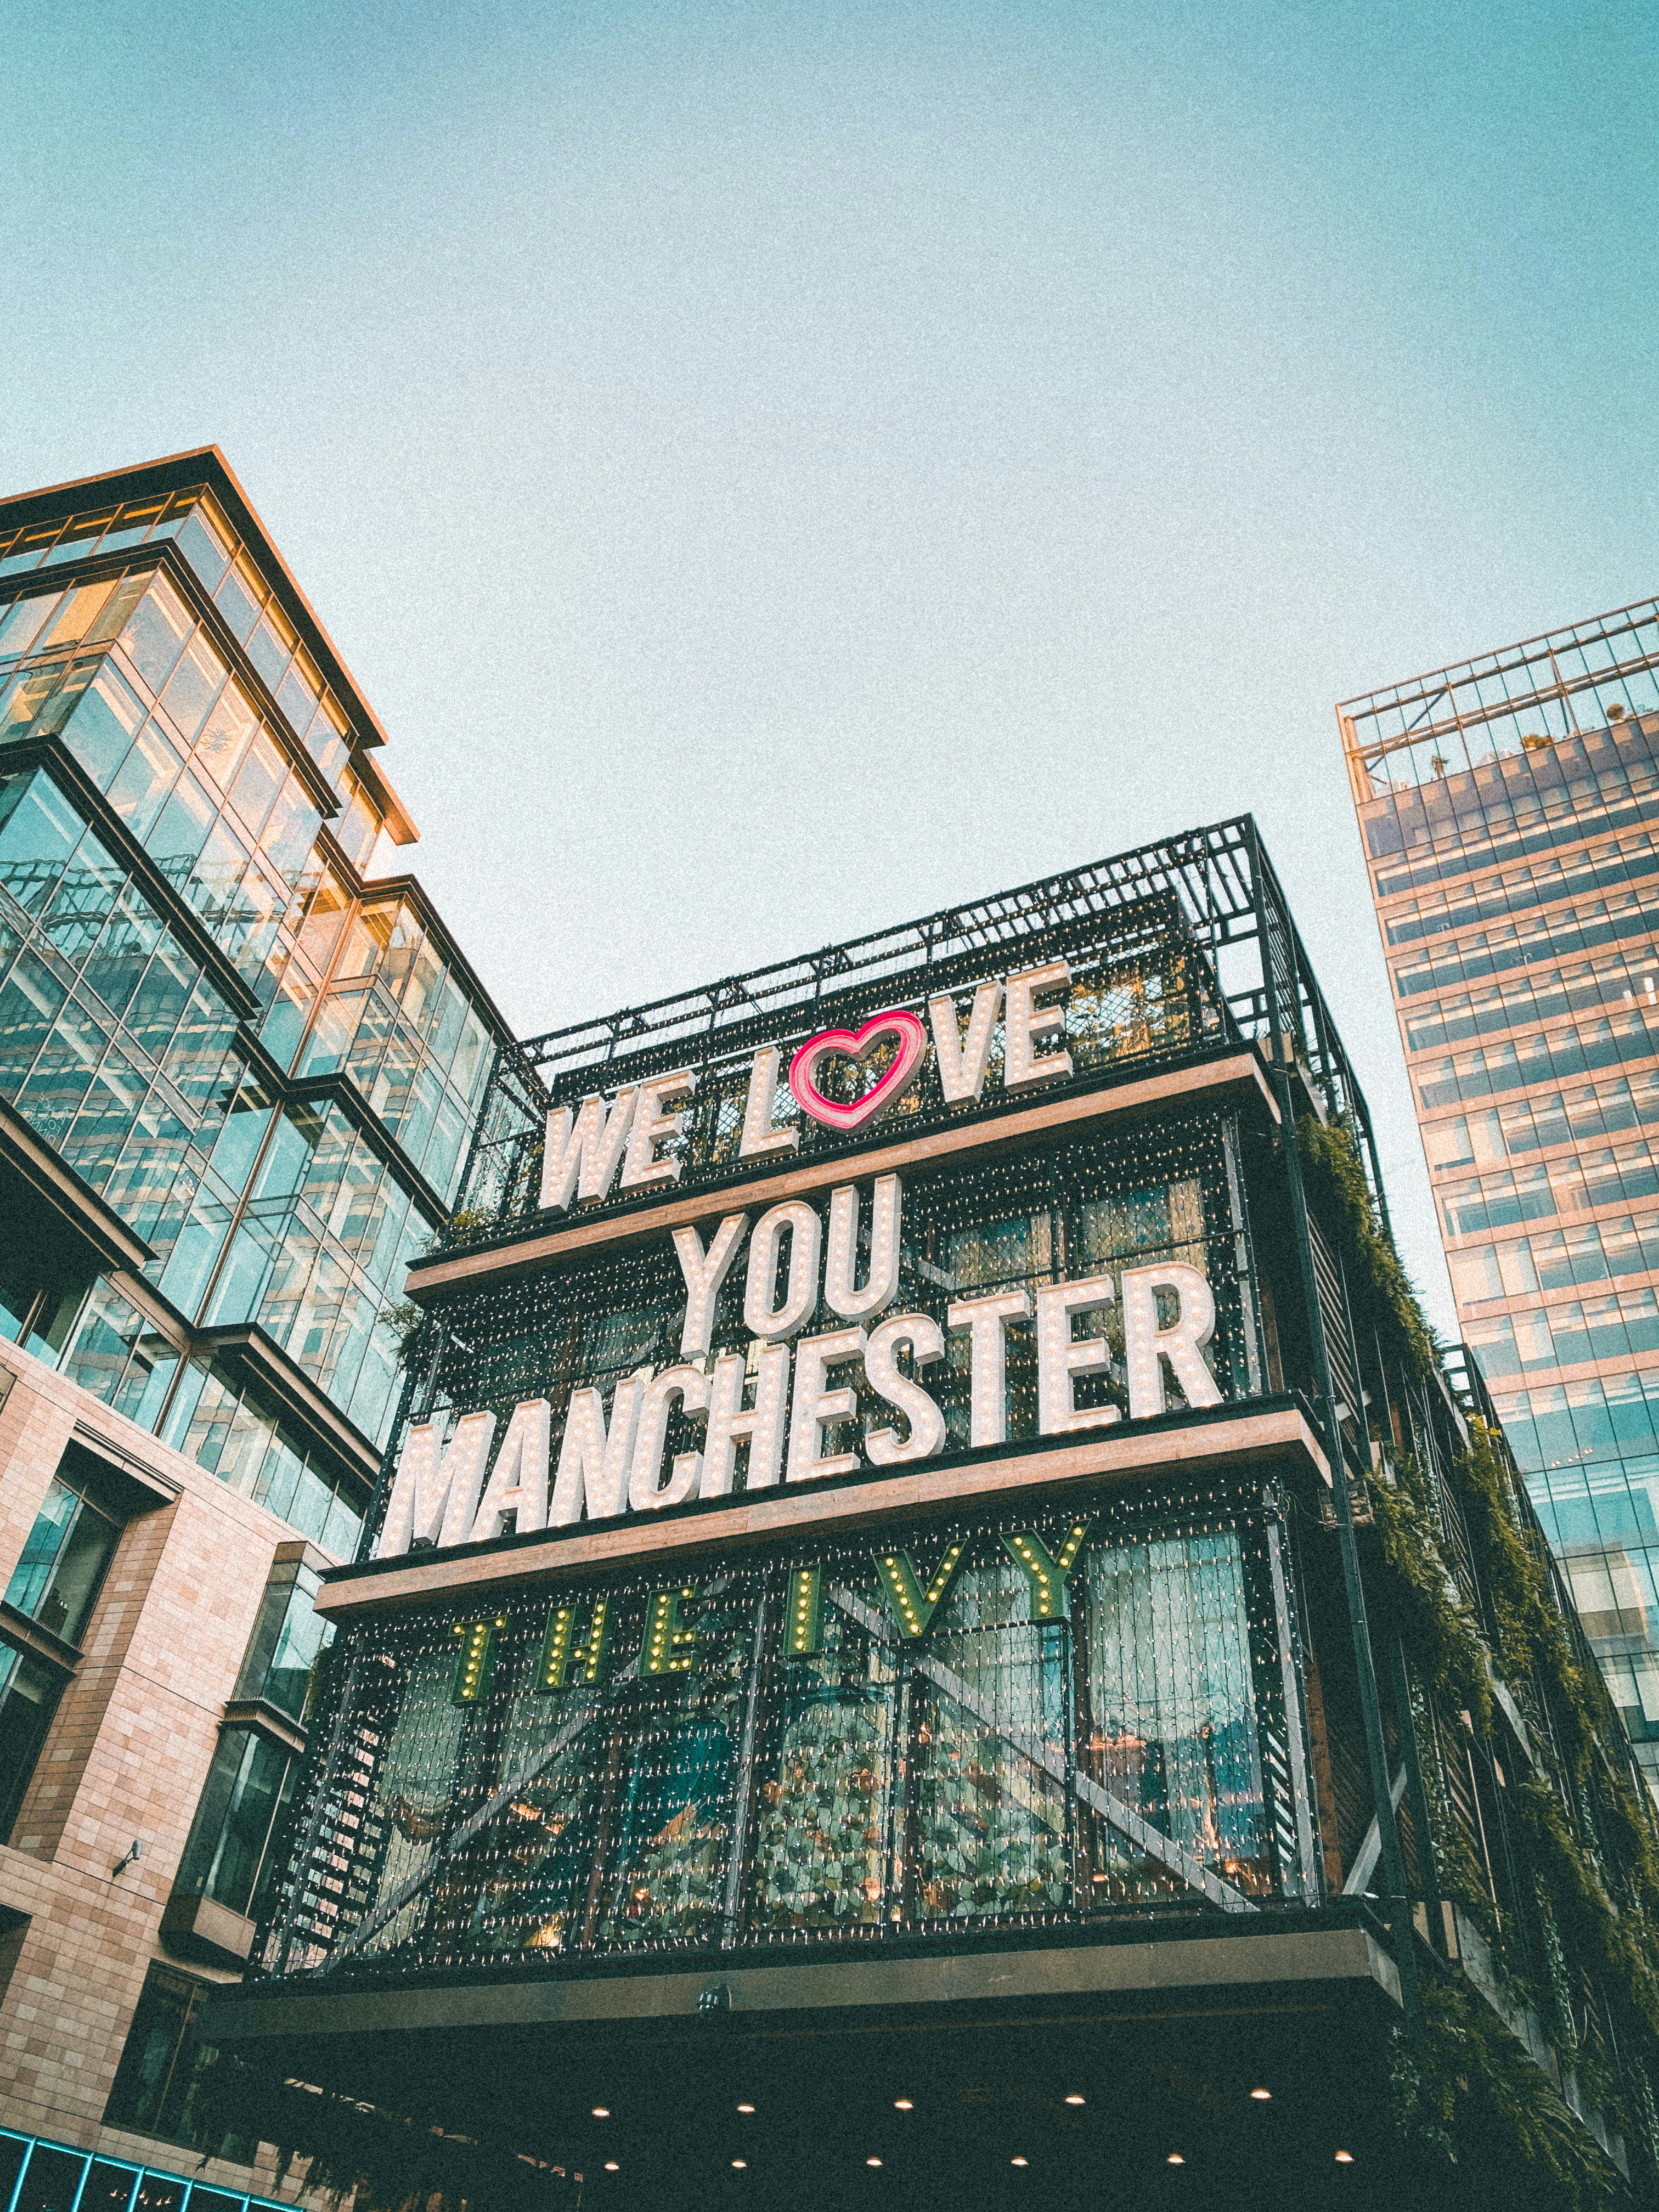 A modern urban scene featuring a building adorned with large neon text that reads WE LOVE YOU MANCHESTER with a pink heart symbol. Surrounding the building are glass-fronted high-rises against a clear sky.